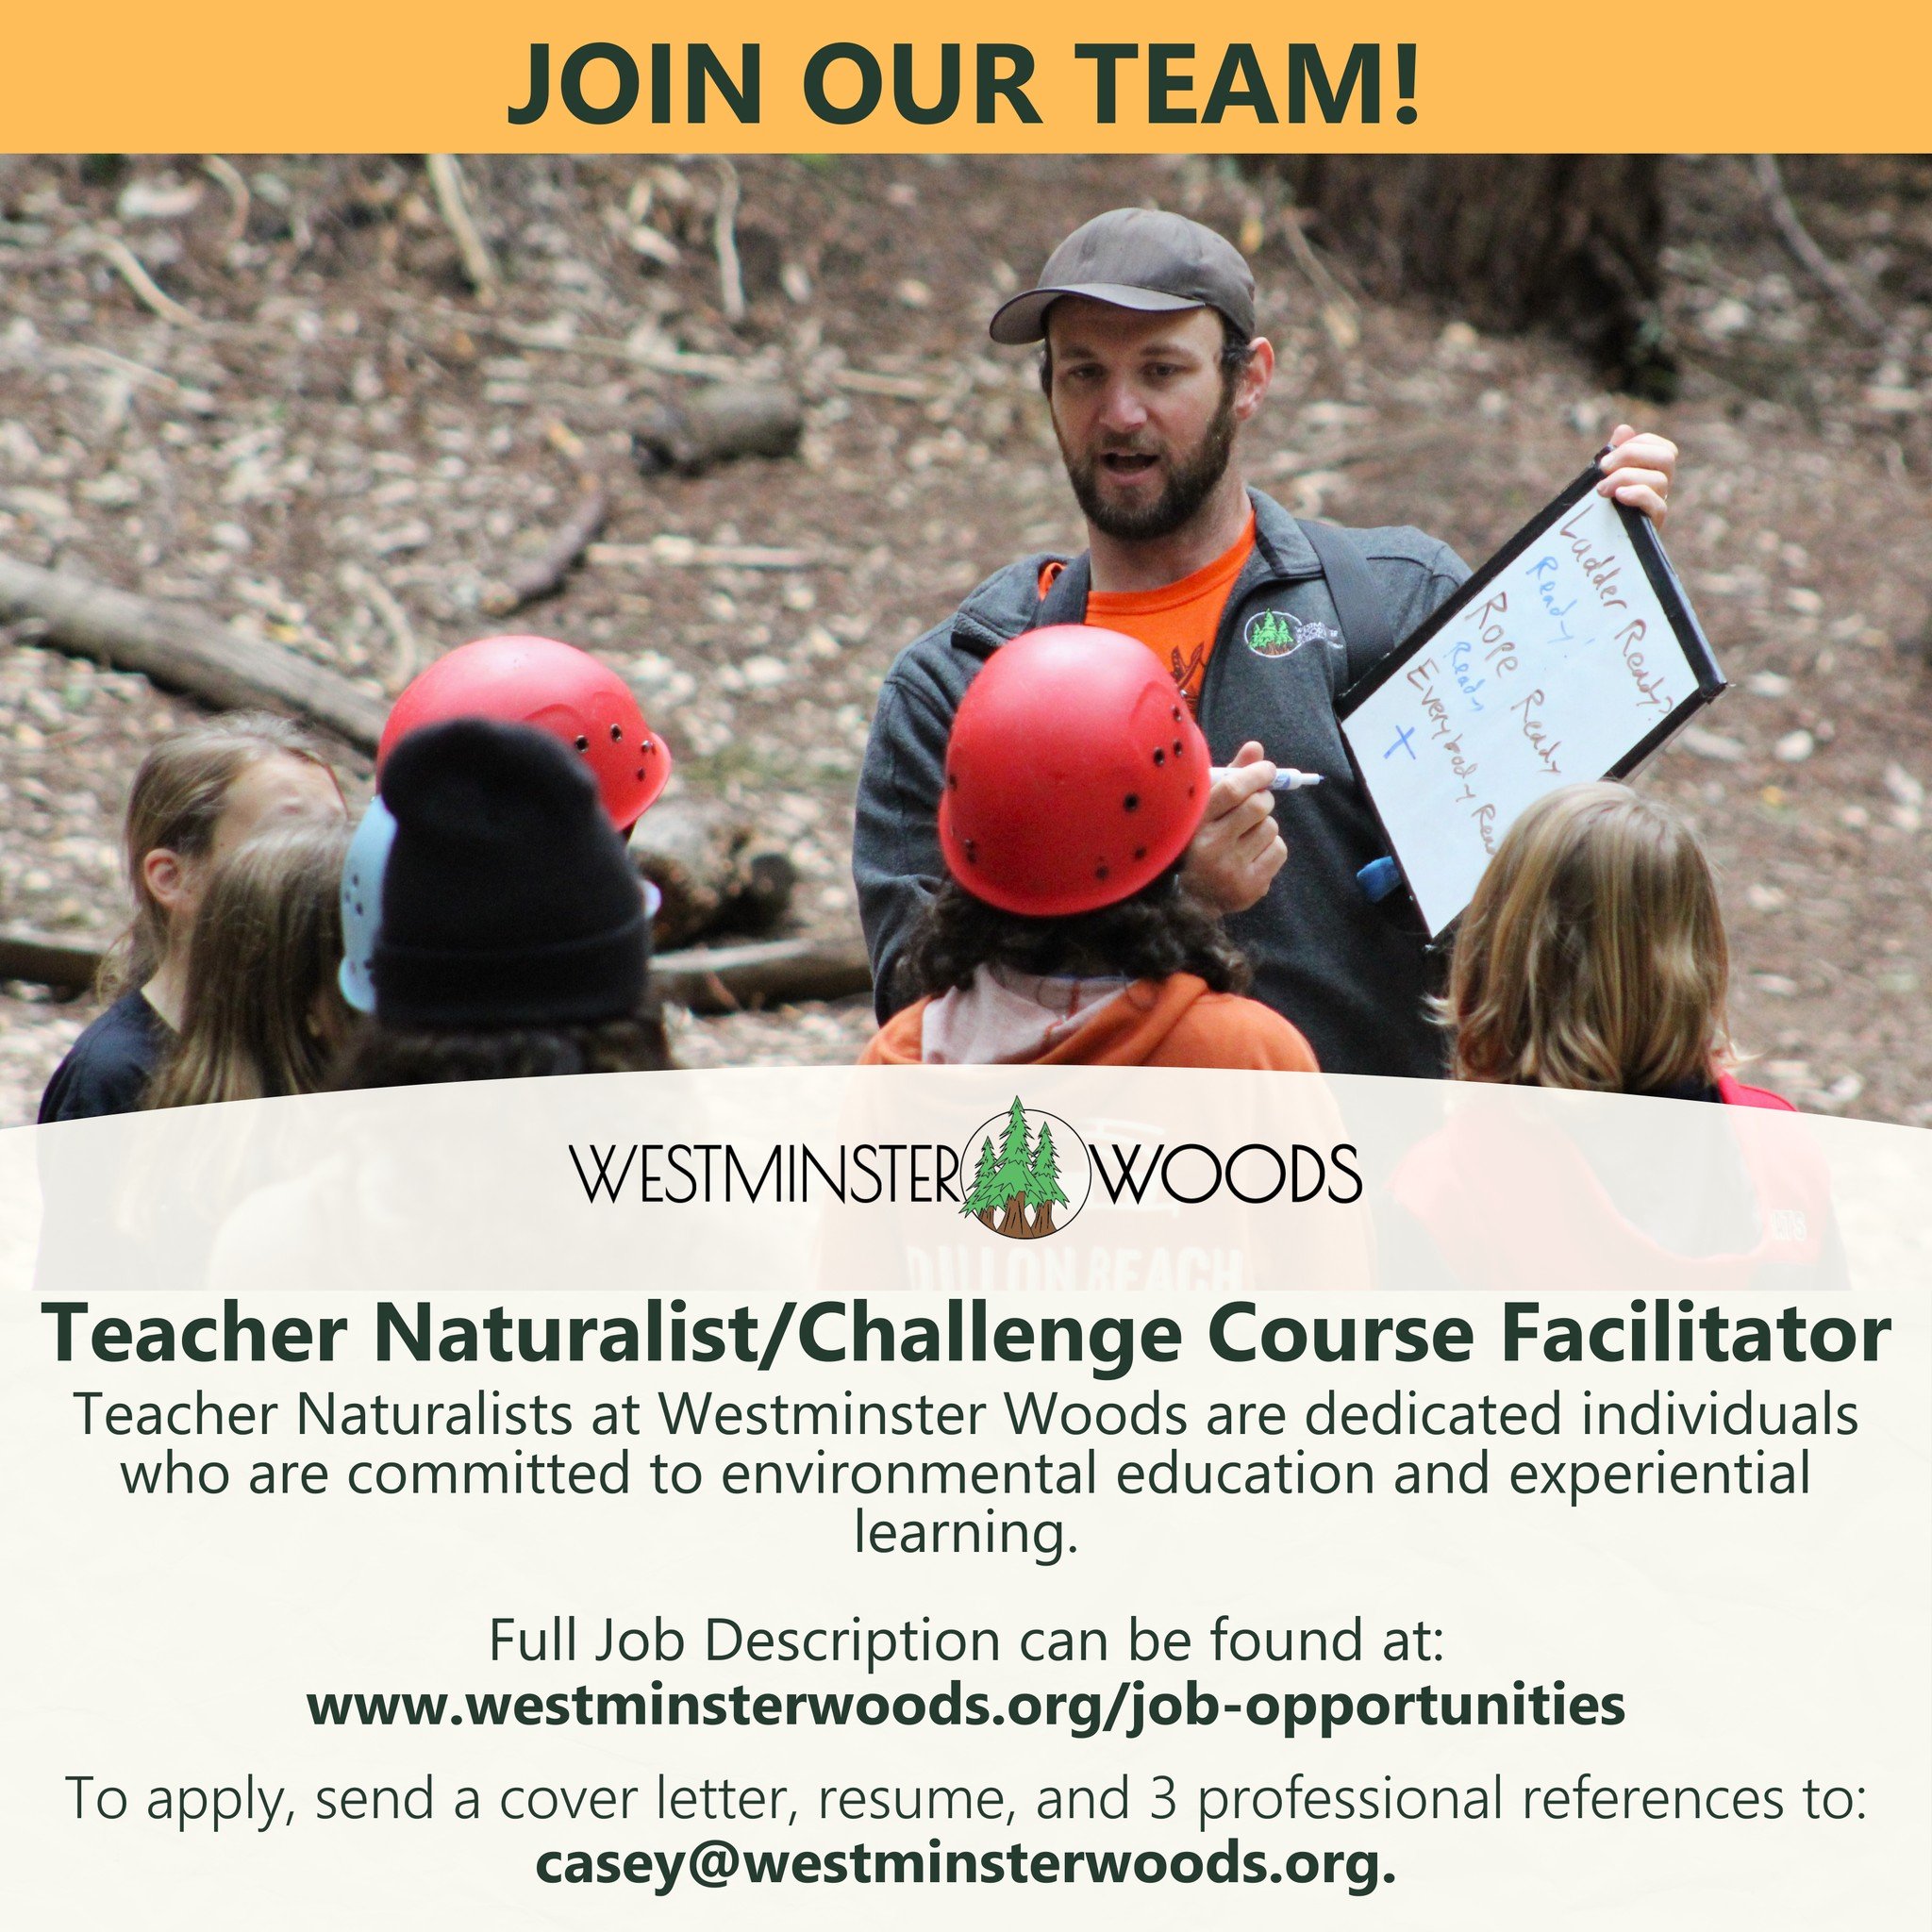 📢Job Alert 📢 We're hiring Teacher Naturalist/Challenge Course Facilitators for the School Programs 2024-2025 school year! Check out the full job description at the link in our bio under &quot;Job Opportunities&quot;!
.
.
.
.
.
.
.
.
#WestminsterWoo